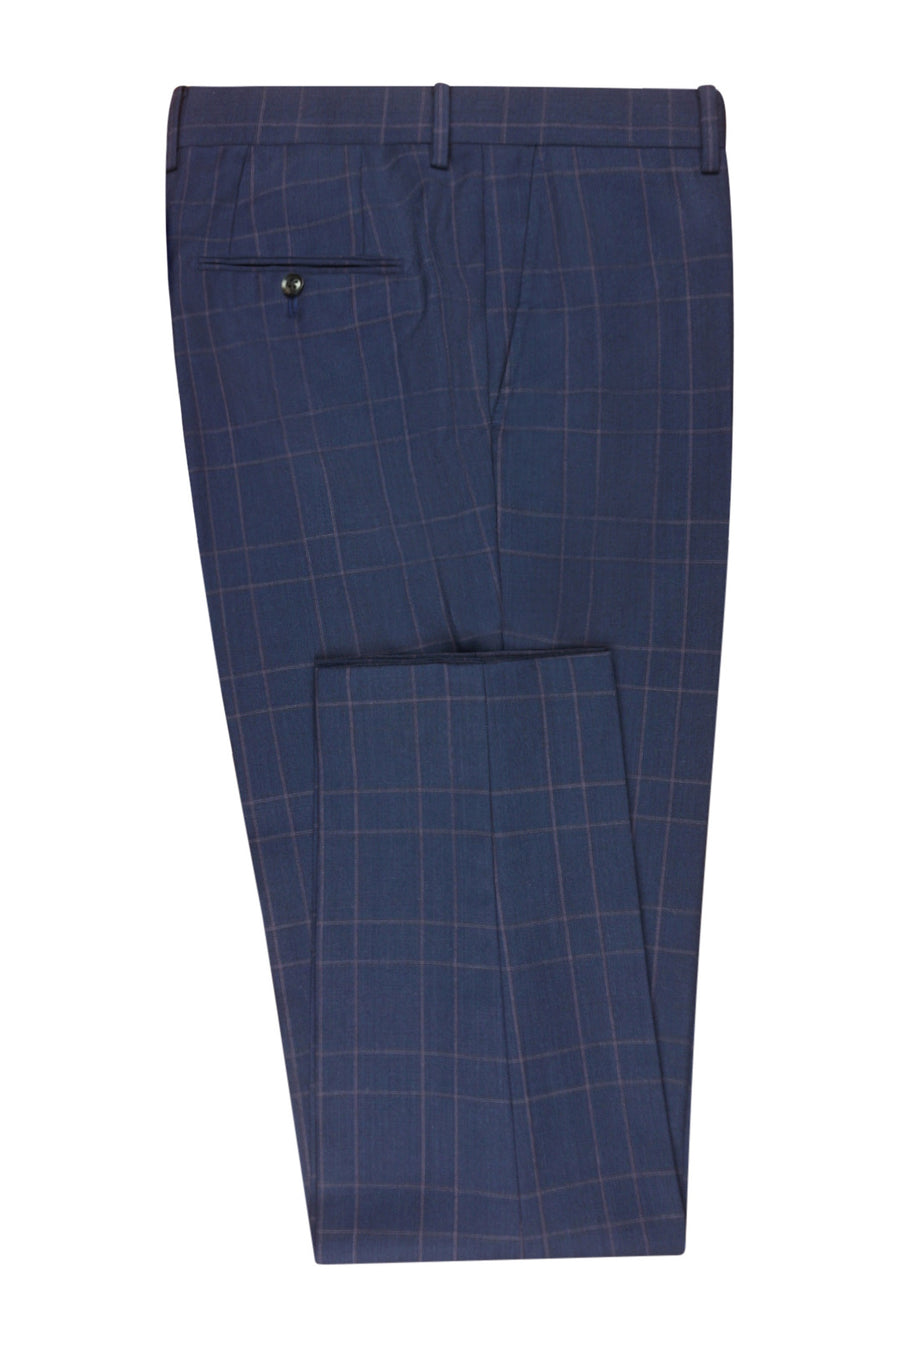 Buy Parx Navy Tapered Fit Flat Front Trousers for Men's Online @ Tata CLiQ